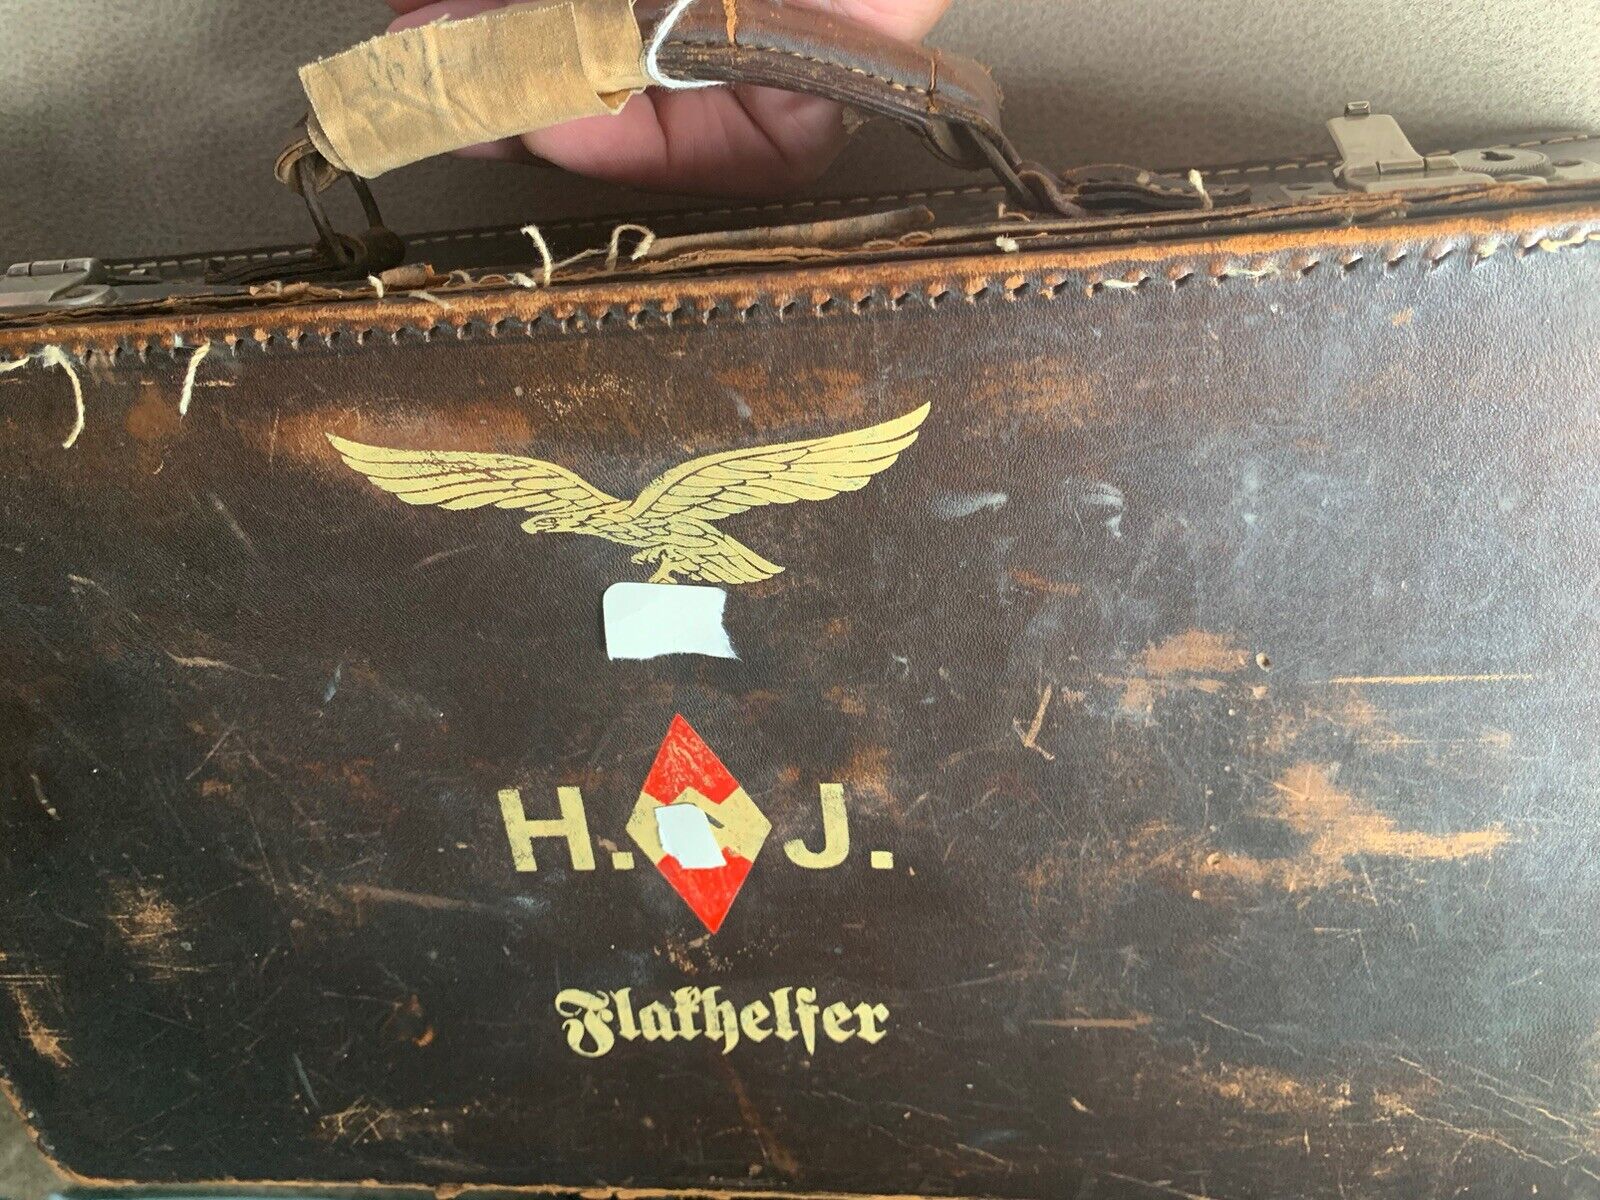 Ww2 German H.J.child Suitcase With Flakhelper Painted On Cover.